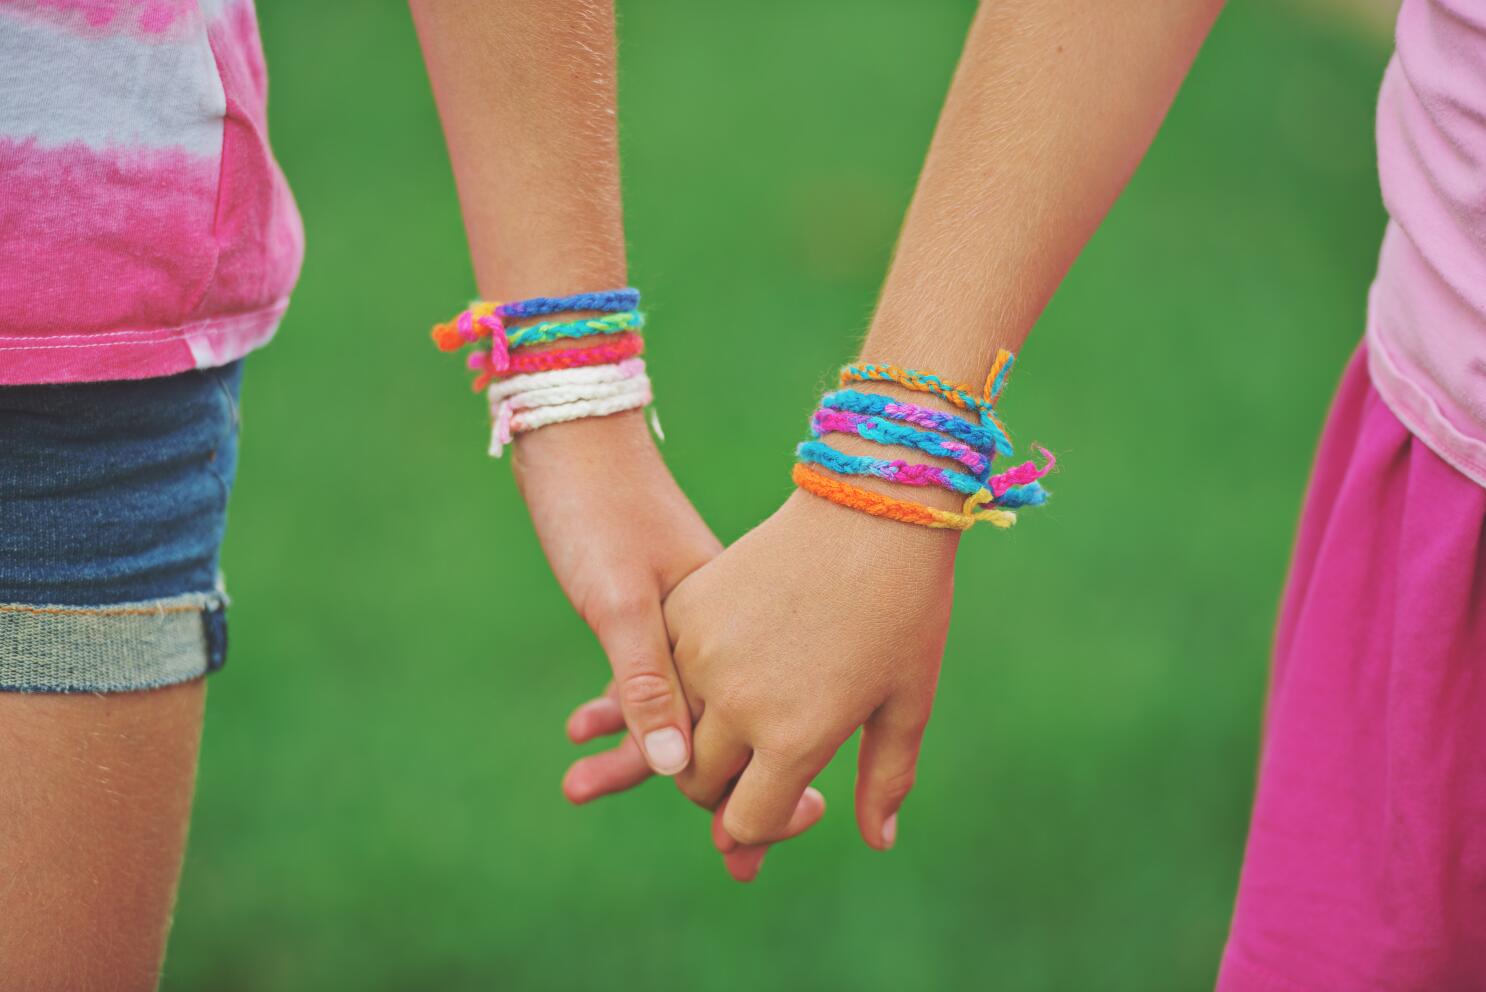 Op-Ed: Friendship bracelets gave meaning to my childhood in a way